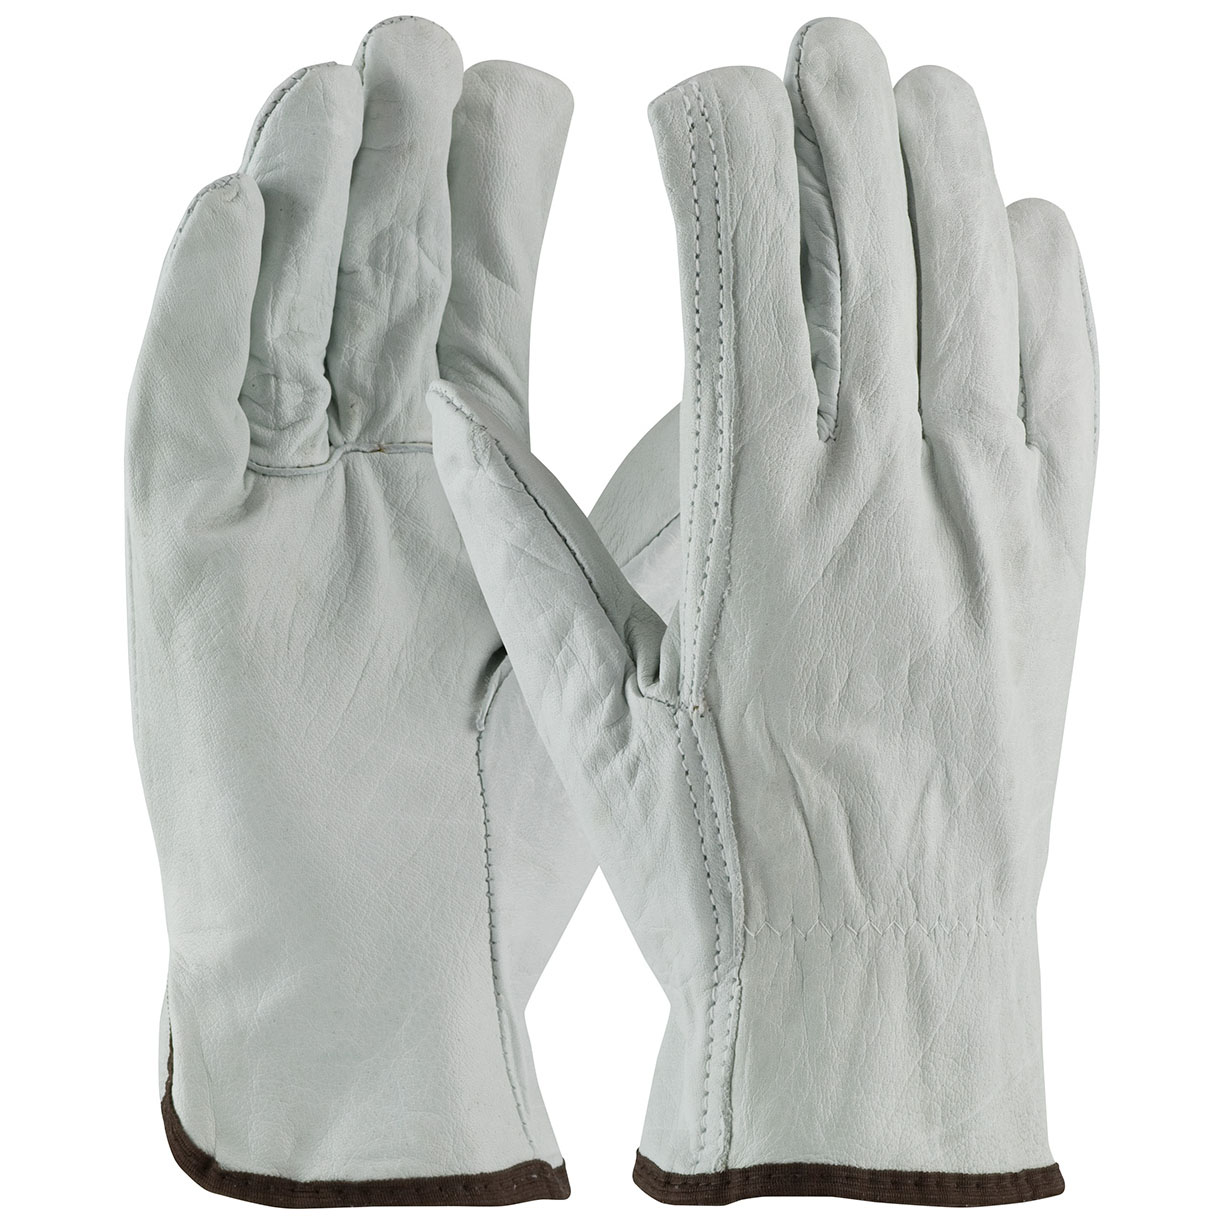 PIP® 686 Industrial Grade General Purpose Gloves, Drivers, Top Grain Cowhide Leather Palm, Top Grain Cowhide Leather, Natural, Slip-On Cuff, Resists: Abrasion, Unlined Lining, Straight Thumb